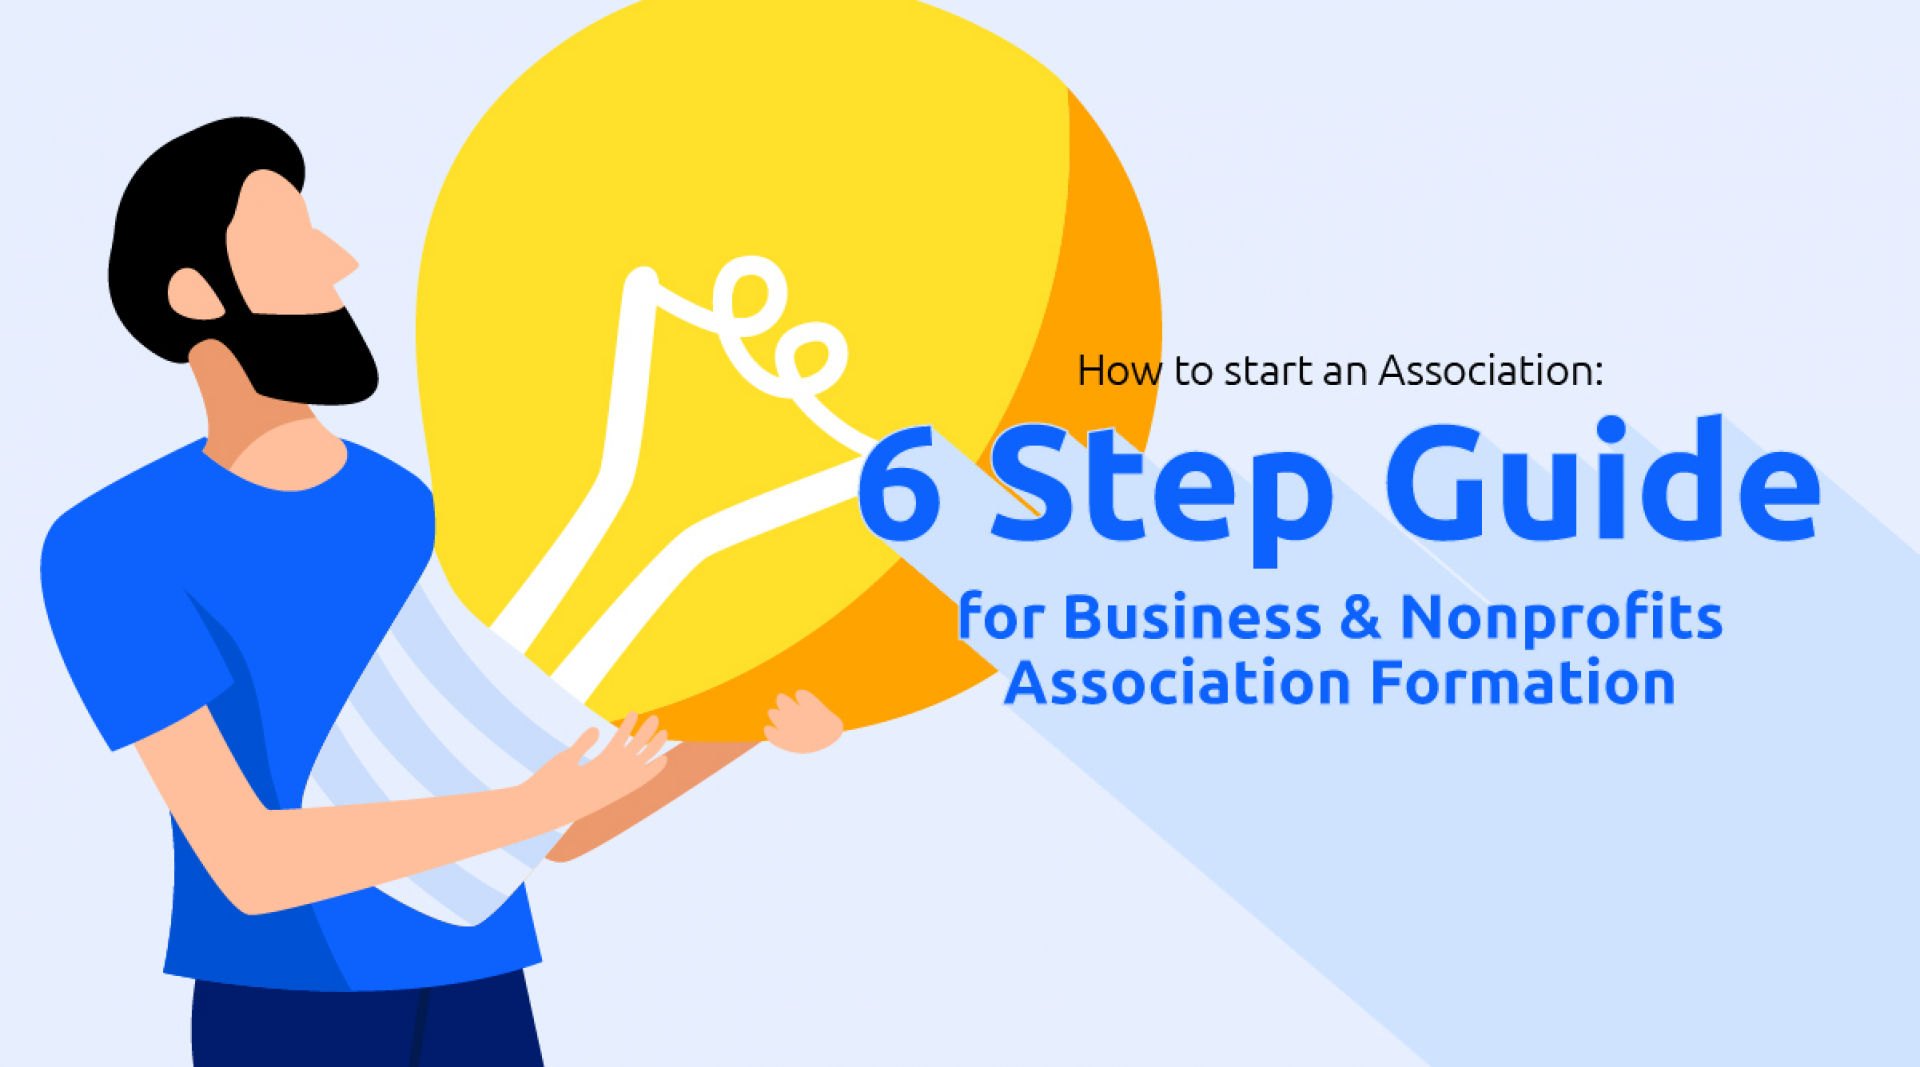 How to Start an Association: 6 Step Guide for Business & Nonprofits Association Formation